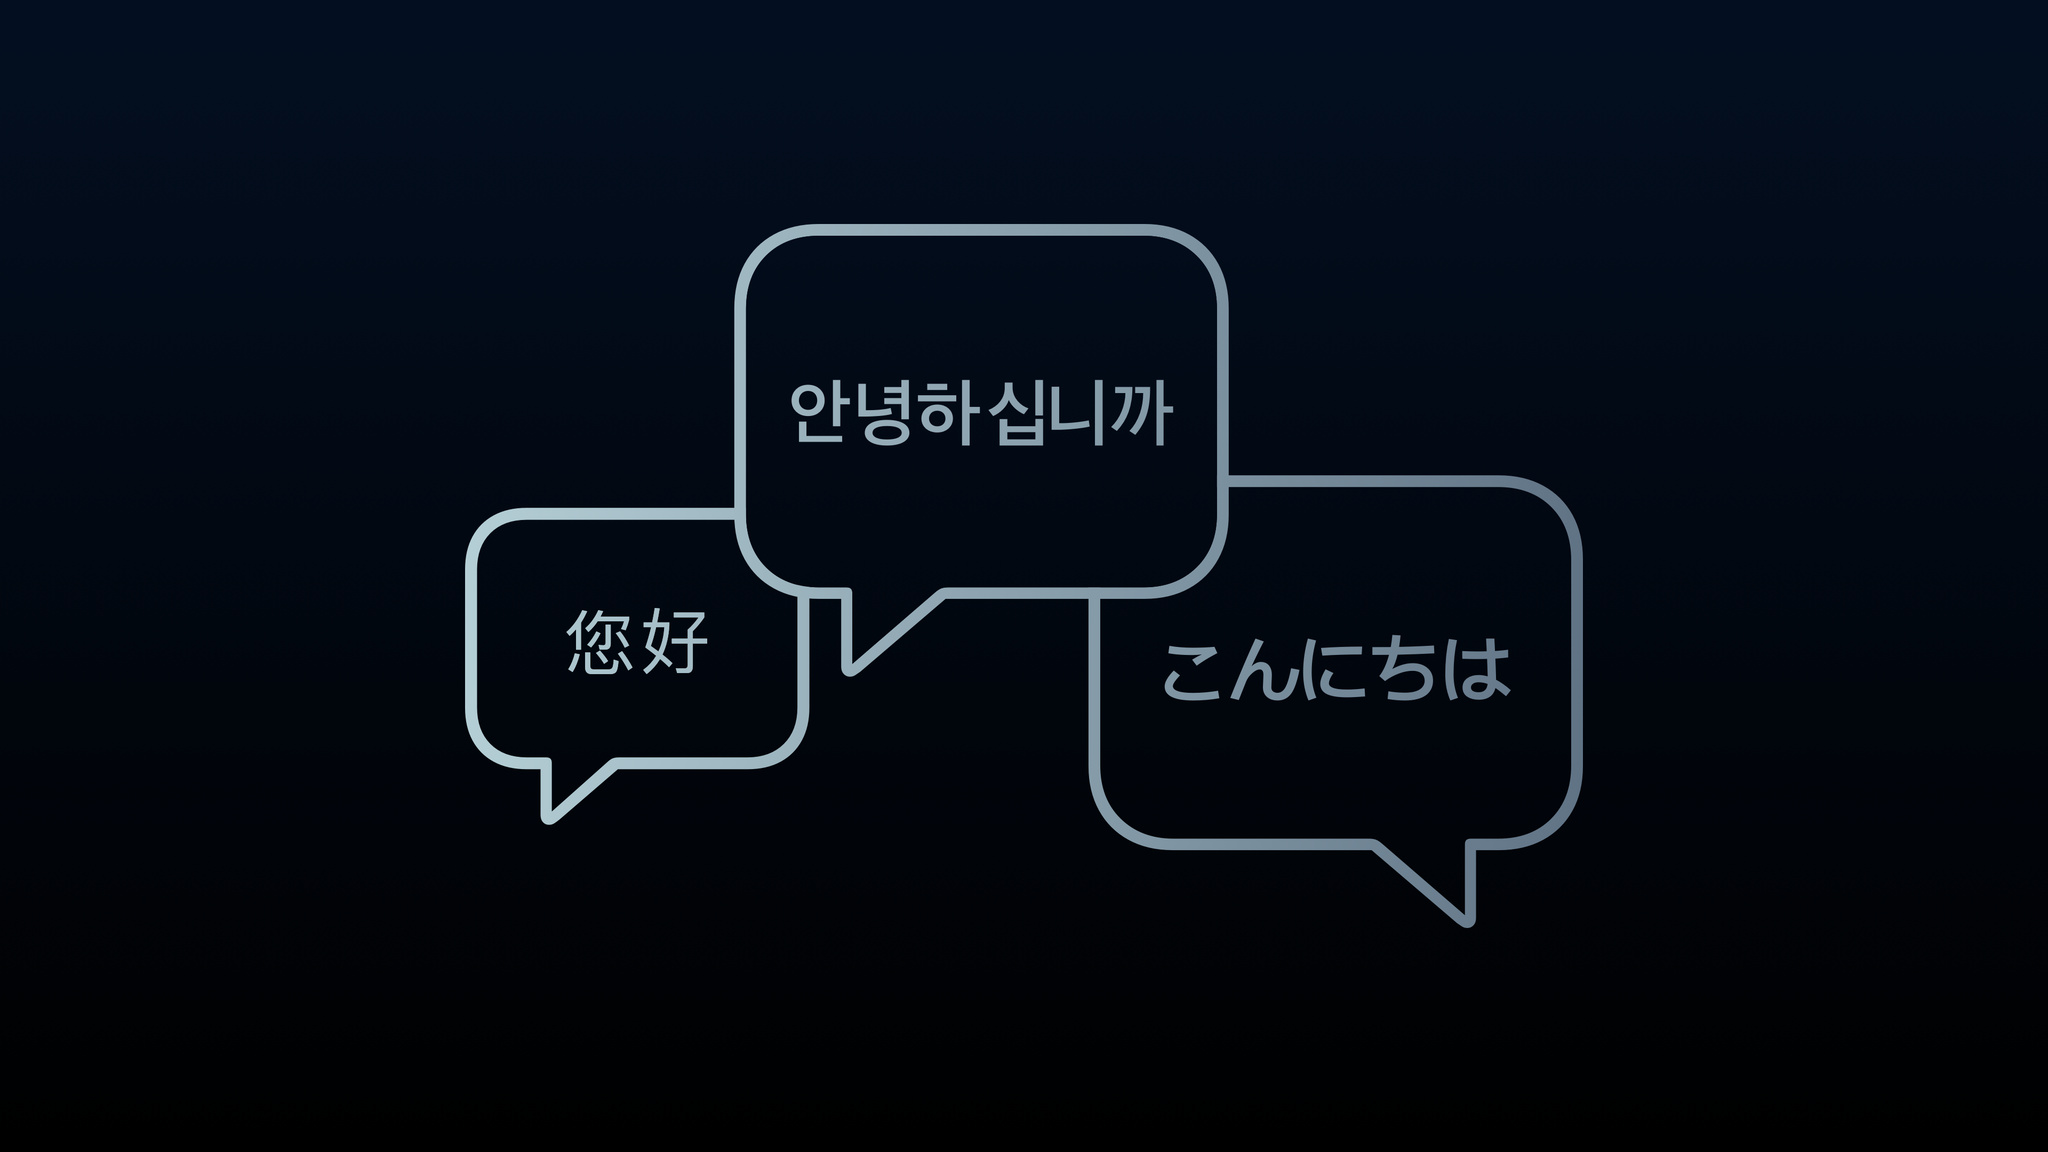 Picture of text bubbles with Japanese, Korean, and Simplified Chinese text.